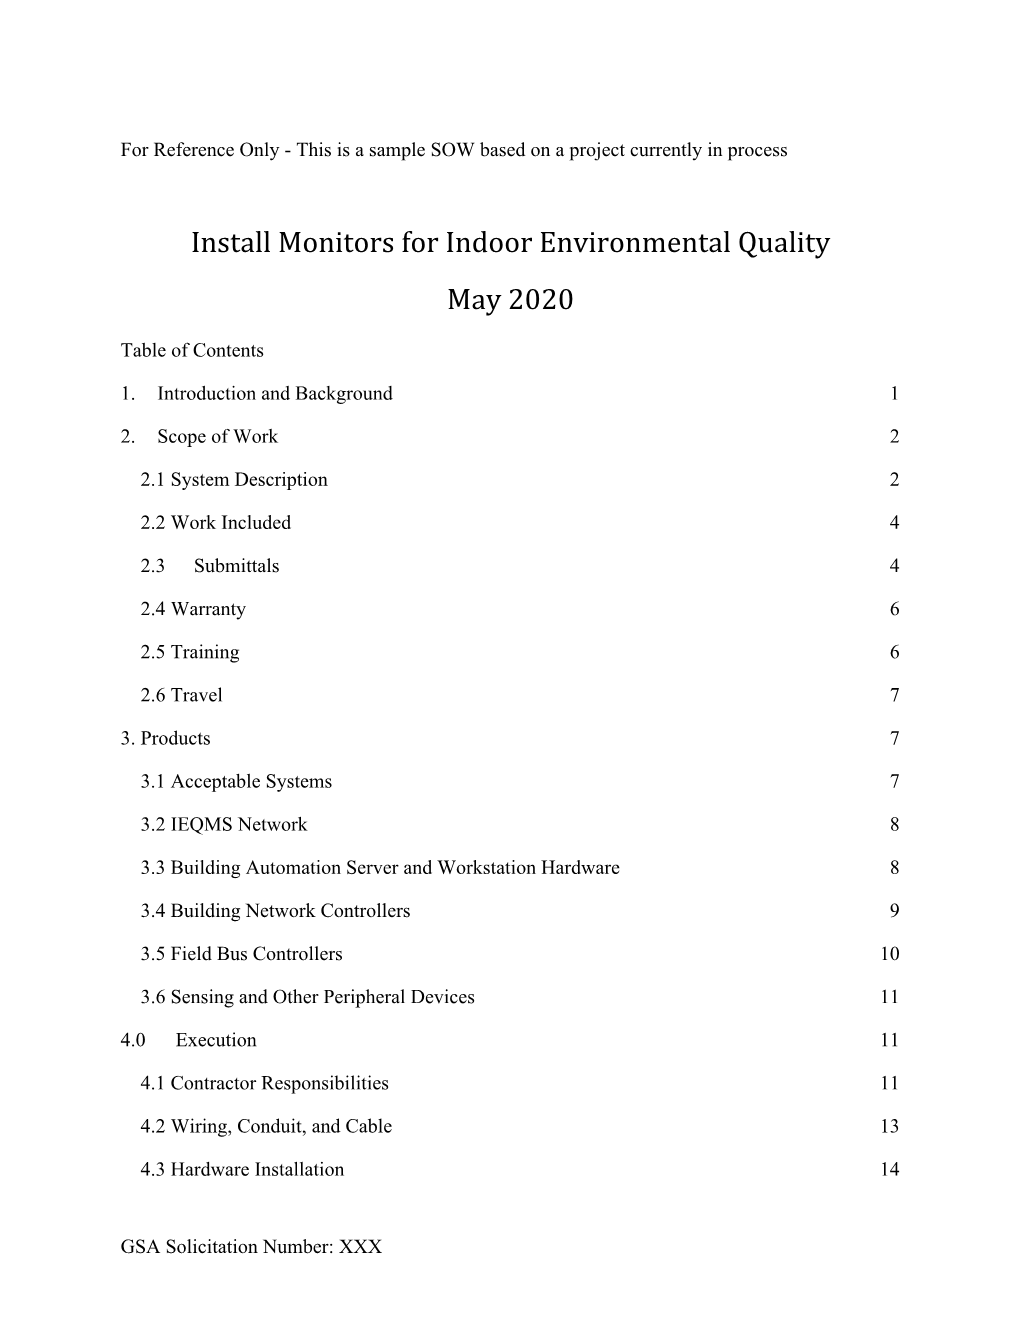 Install Monitors for Indoor Environmental Quality May 2020